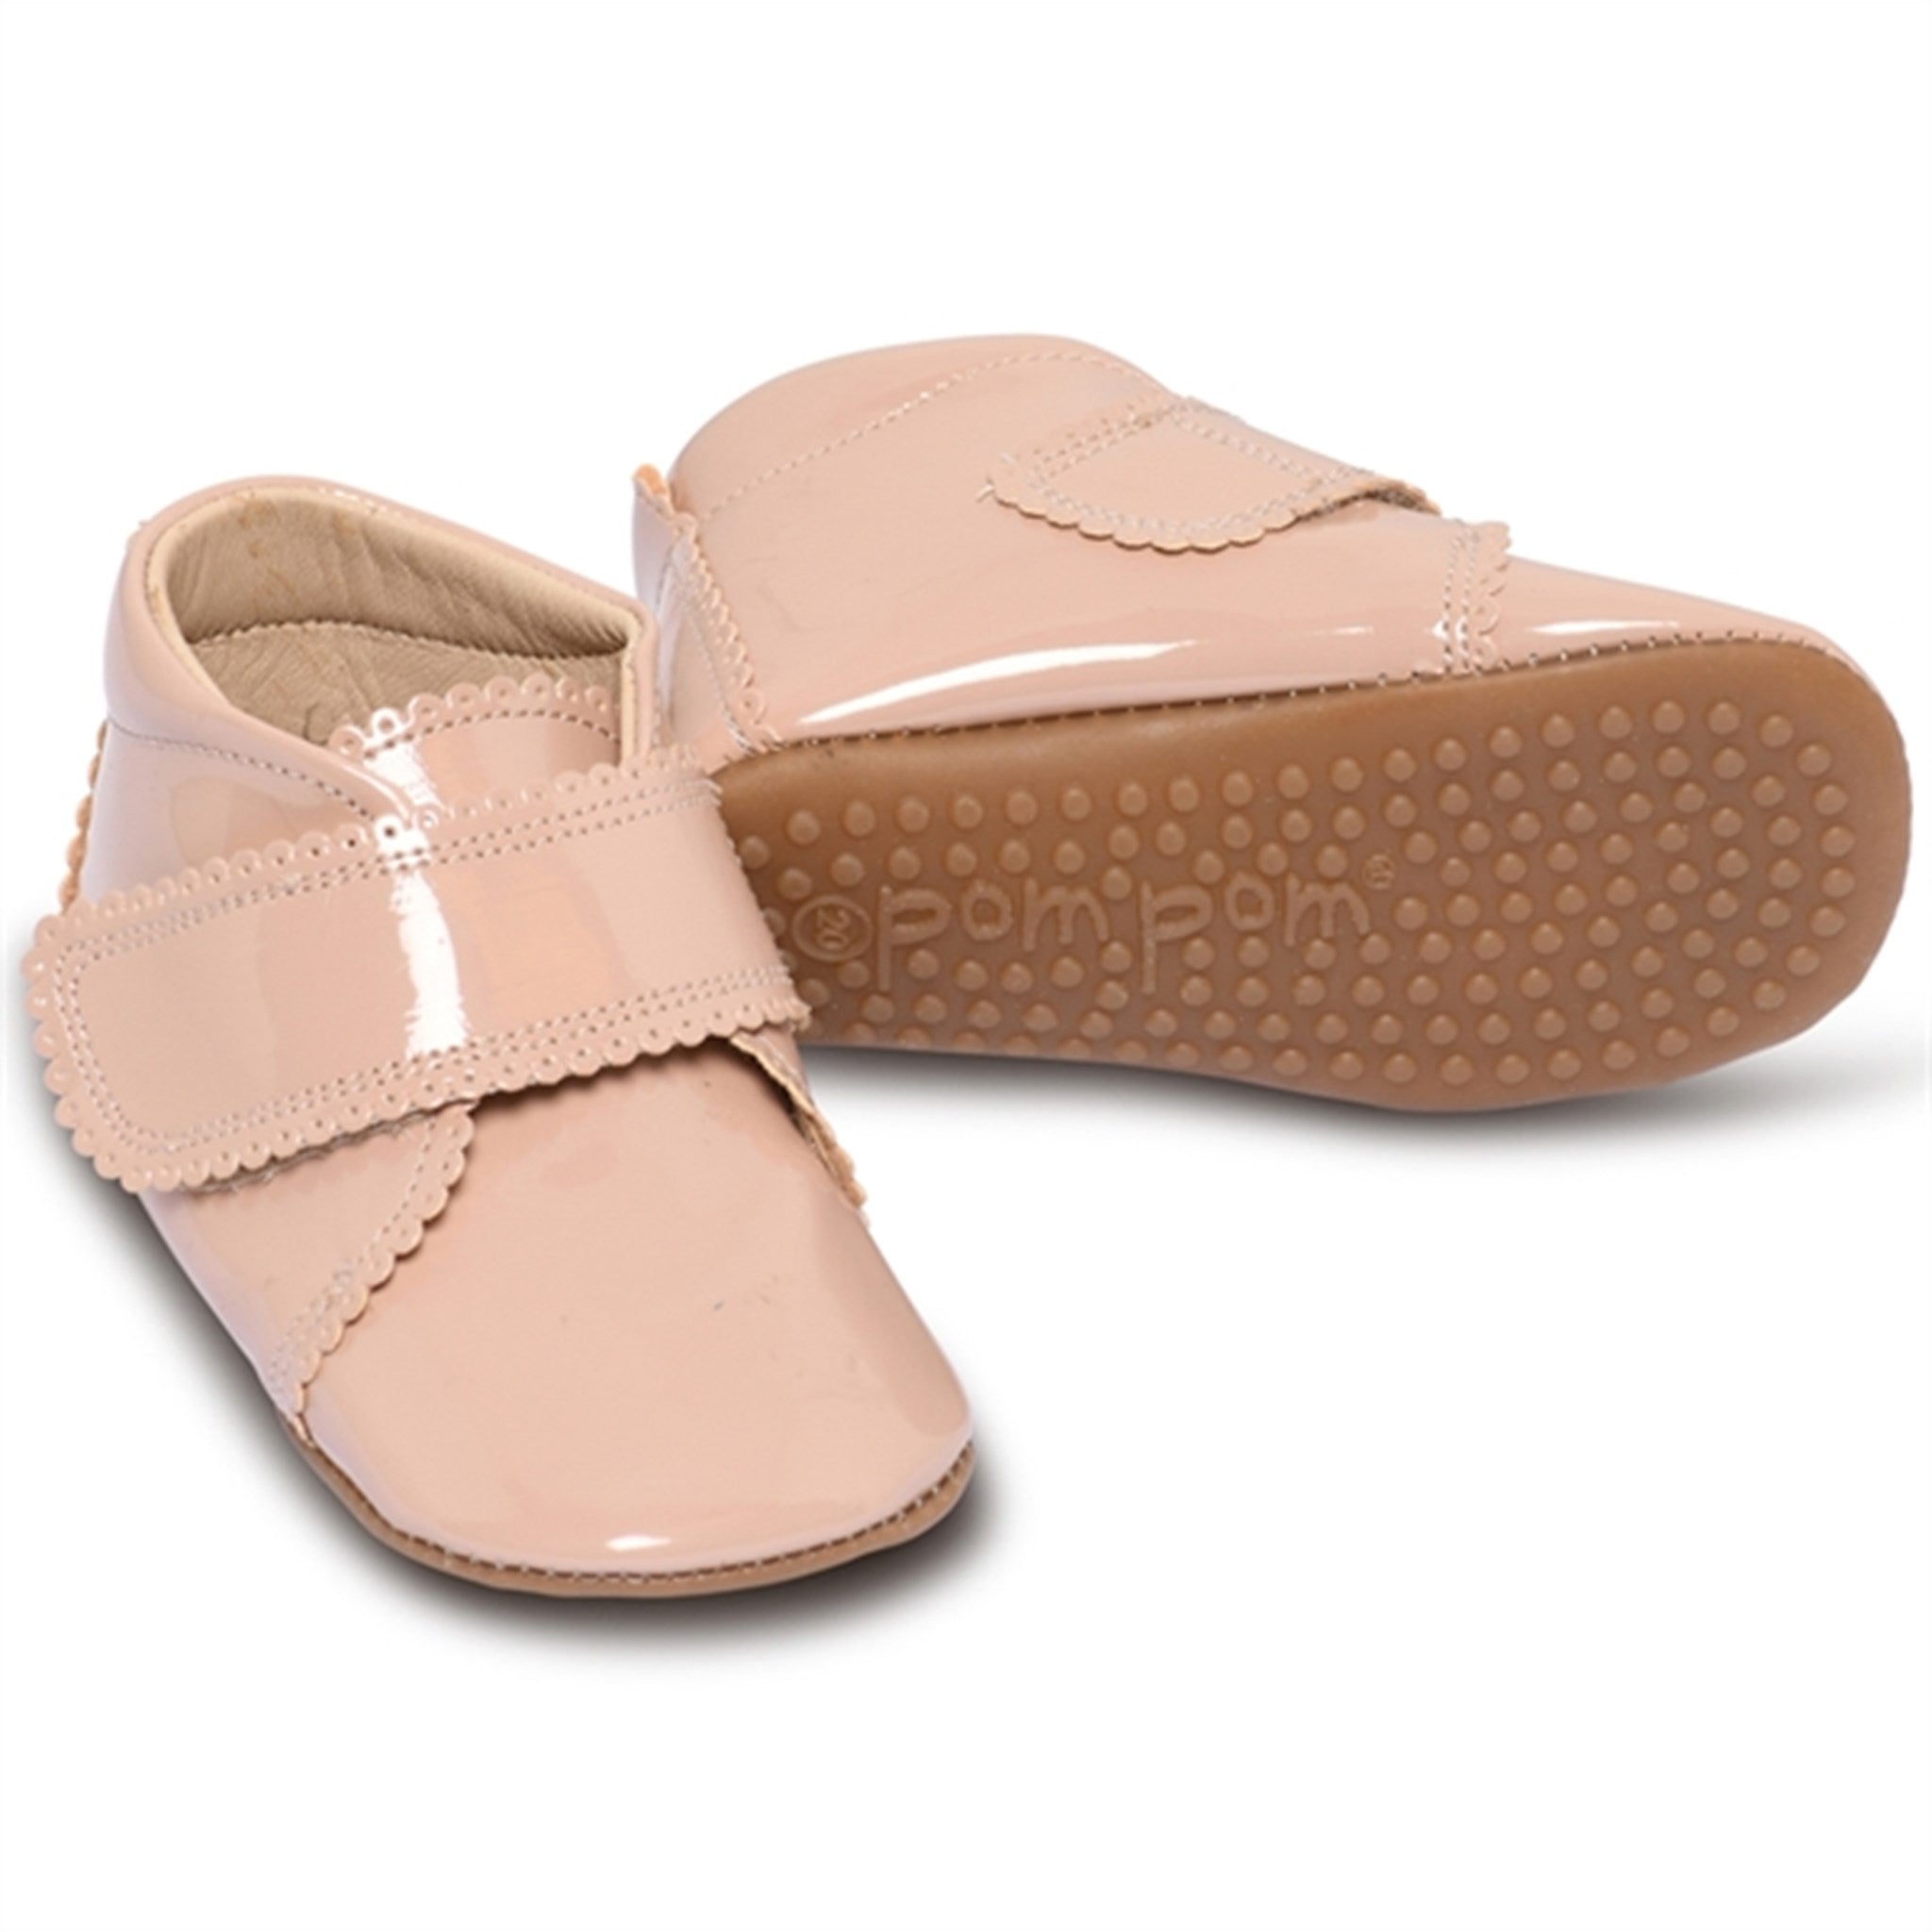 Pom Pom Indoor Shoes Velcro Scallops Dusty Rose Patent